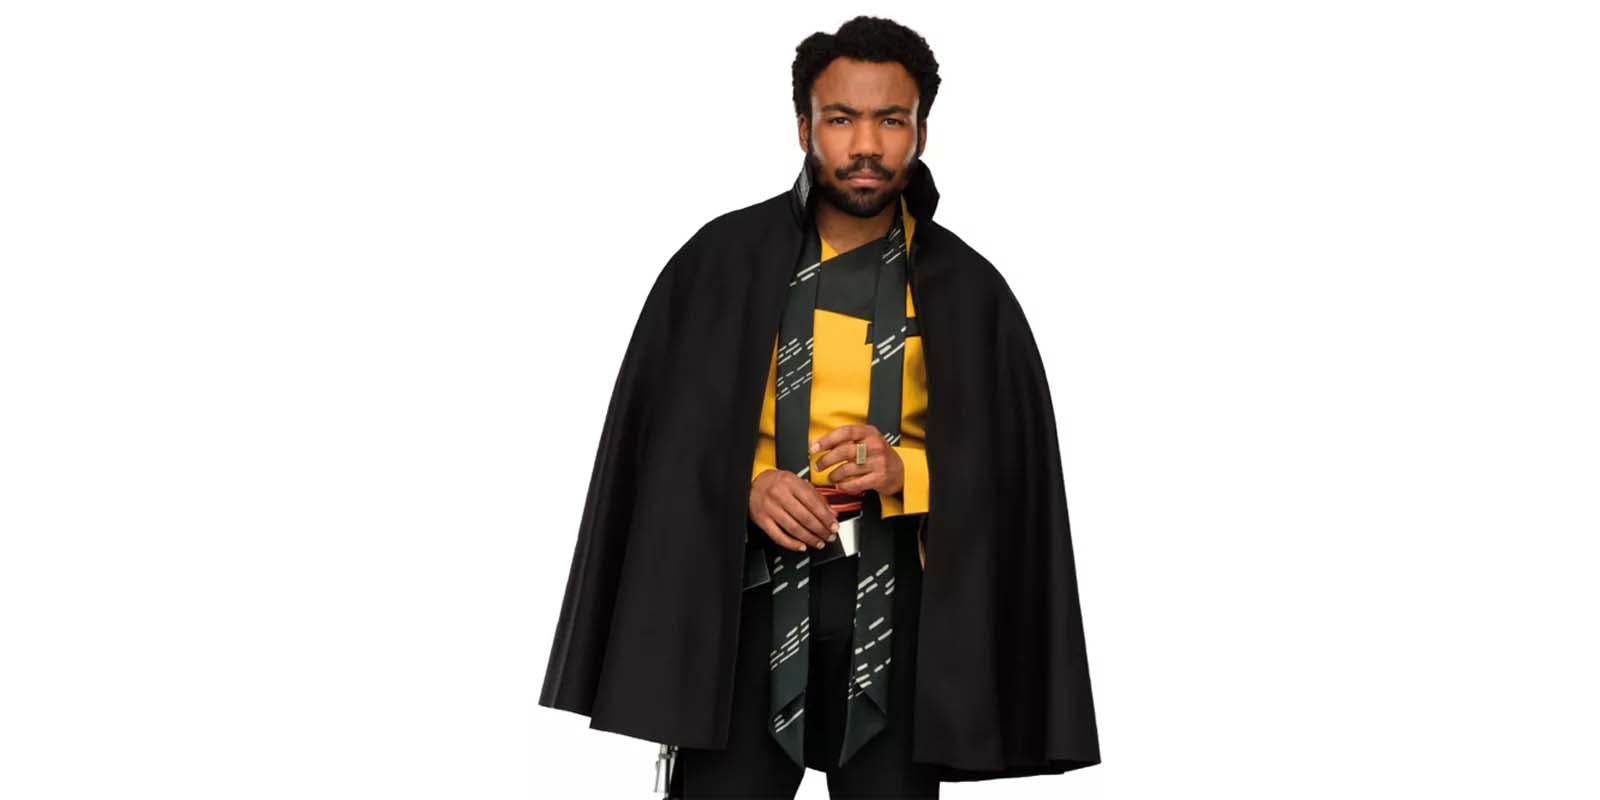 Lando Calrissian: 7 things you need to know